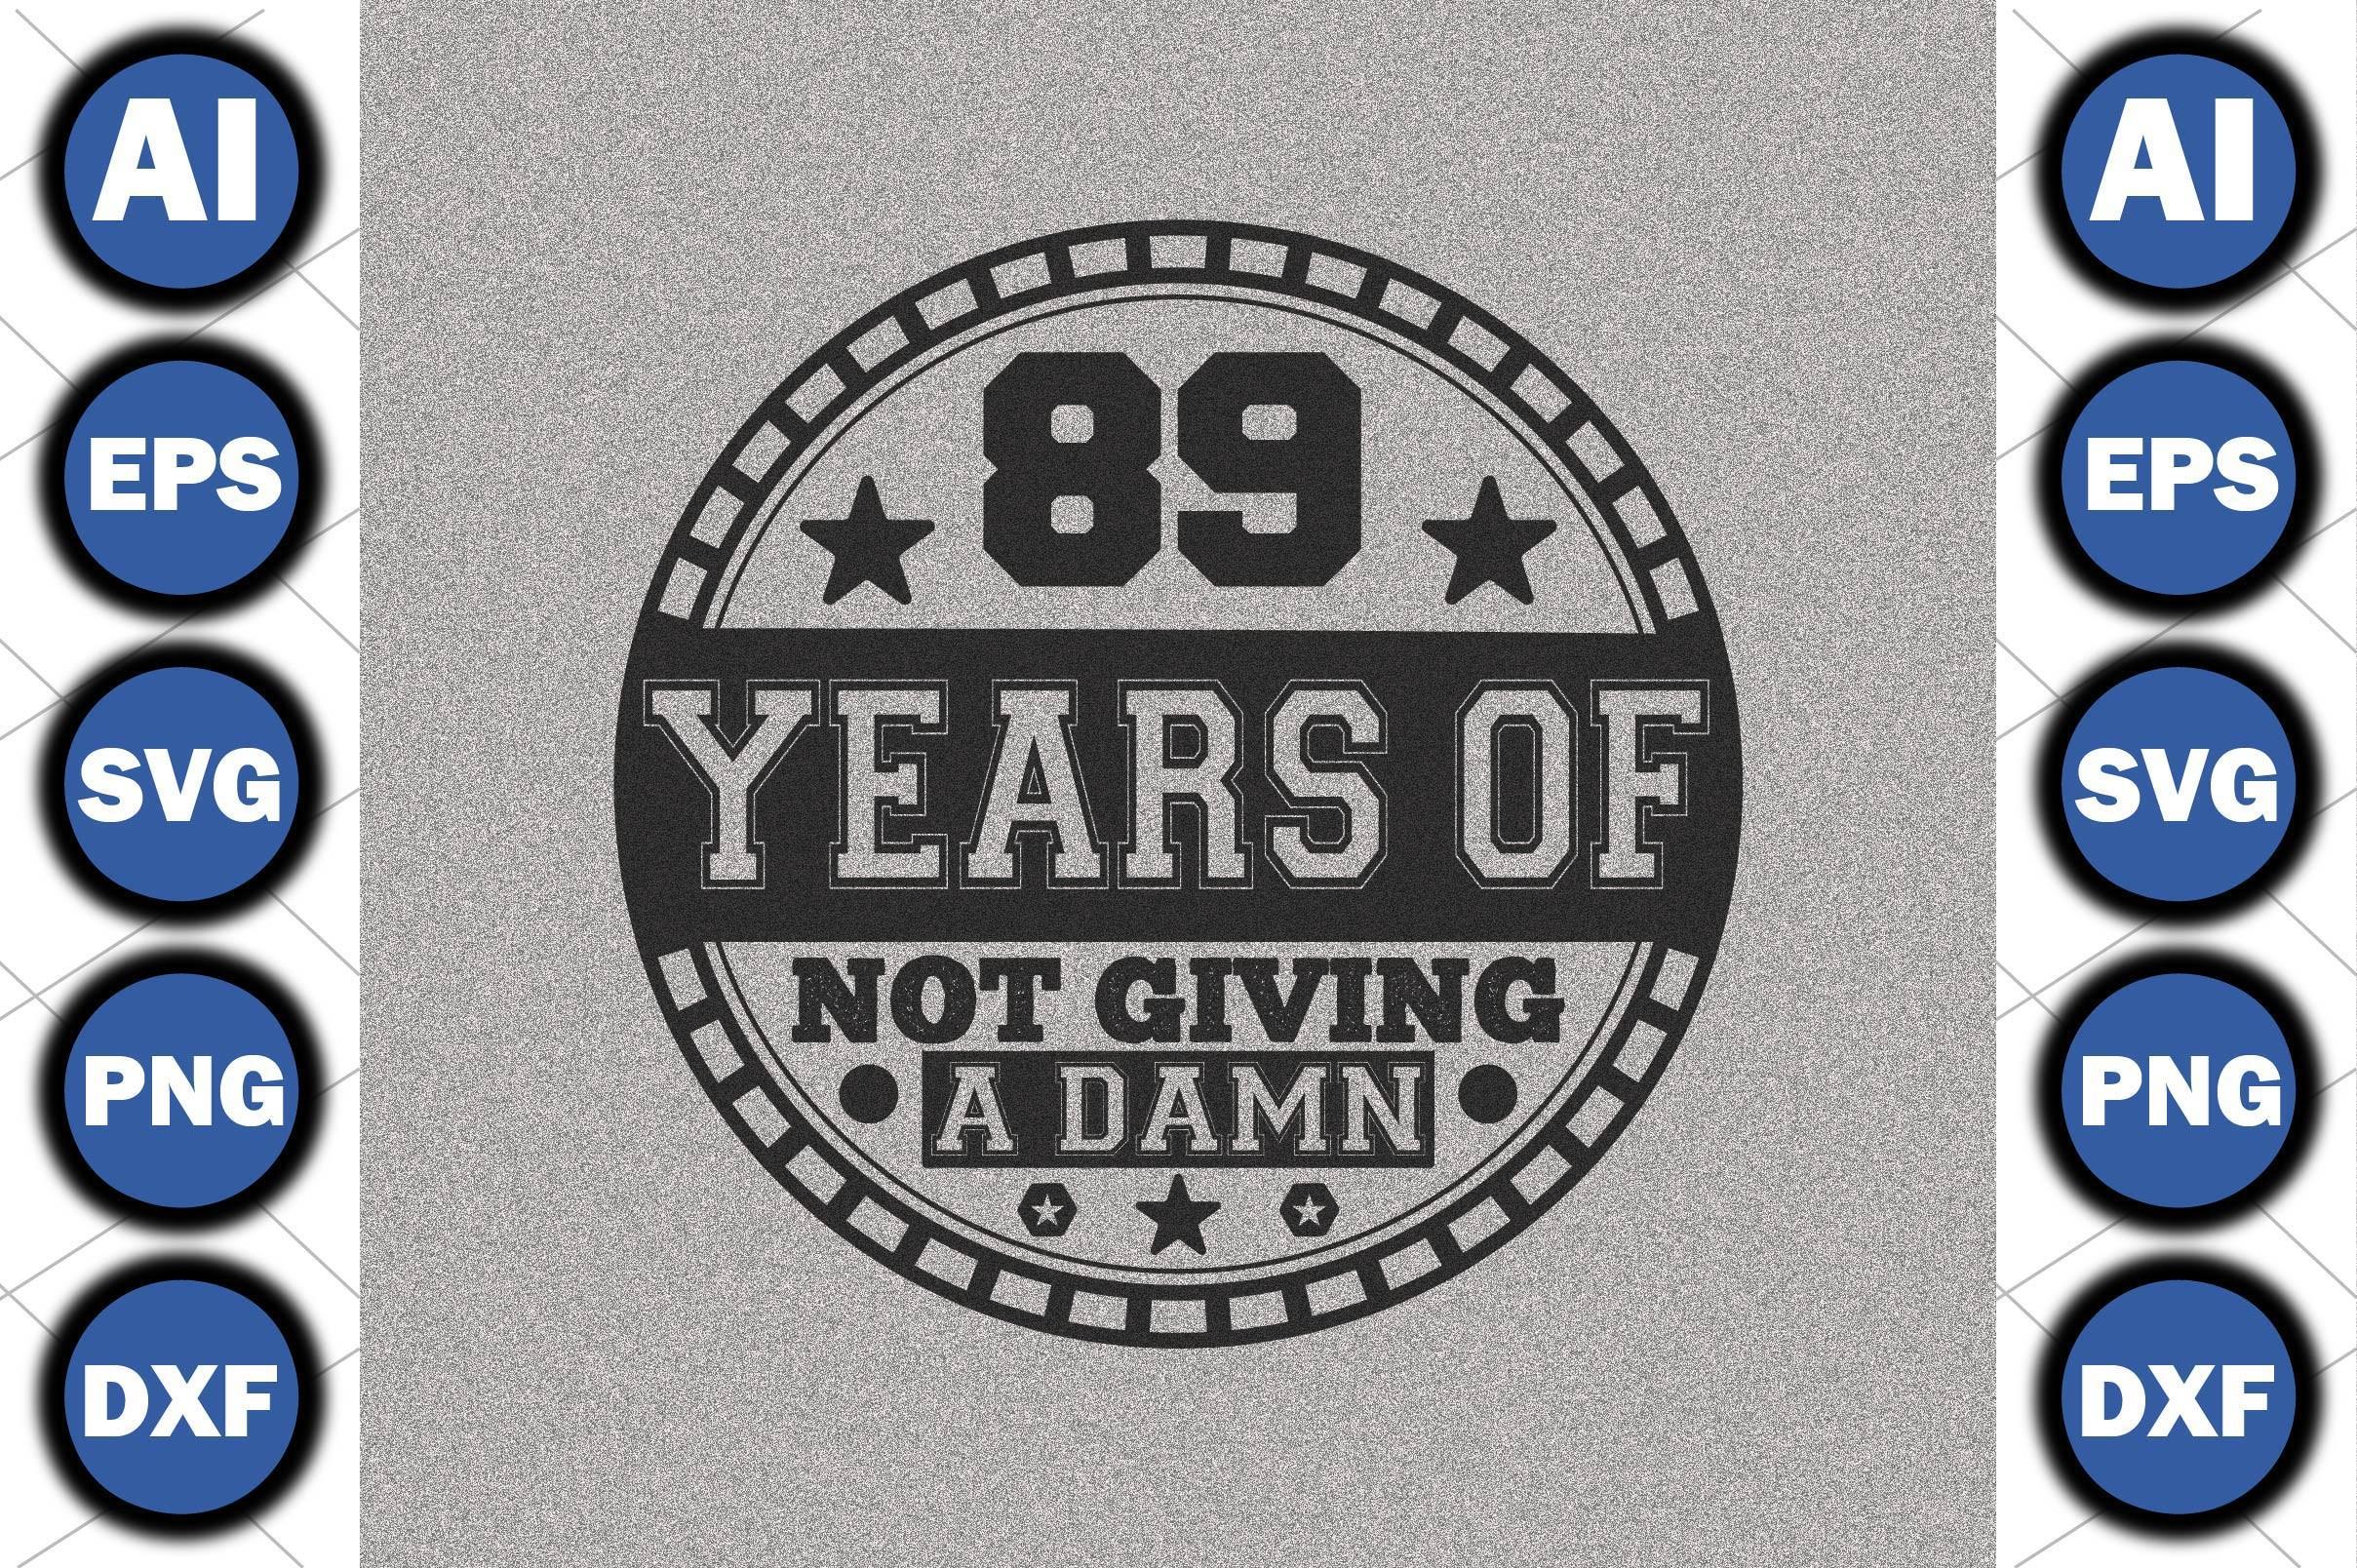 89 Years of Not Giving a Damn